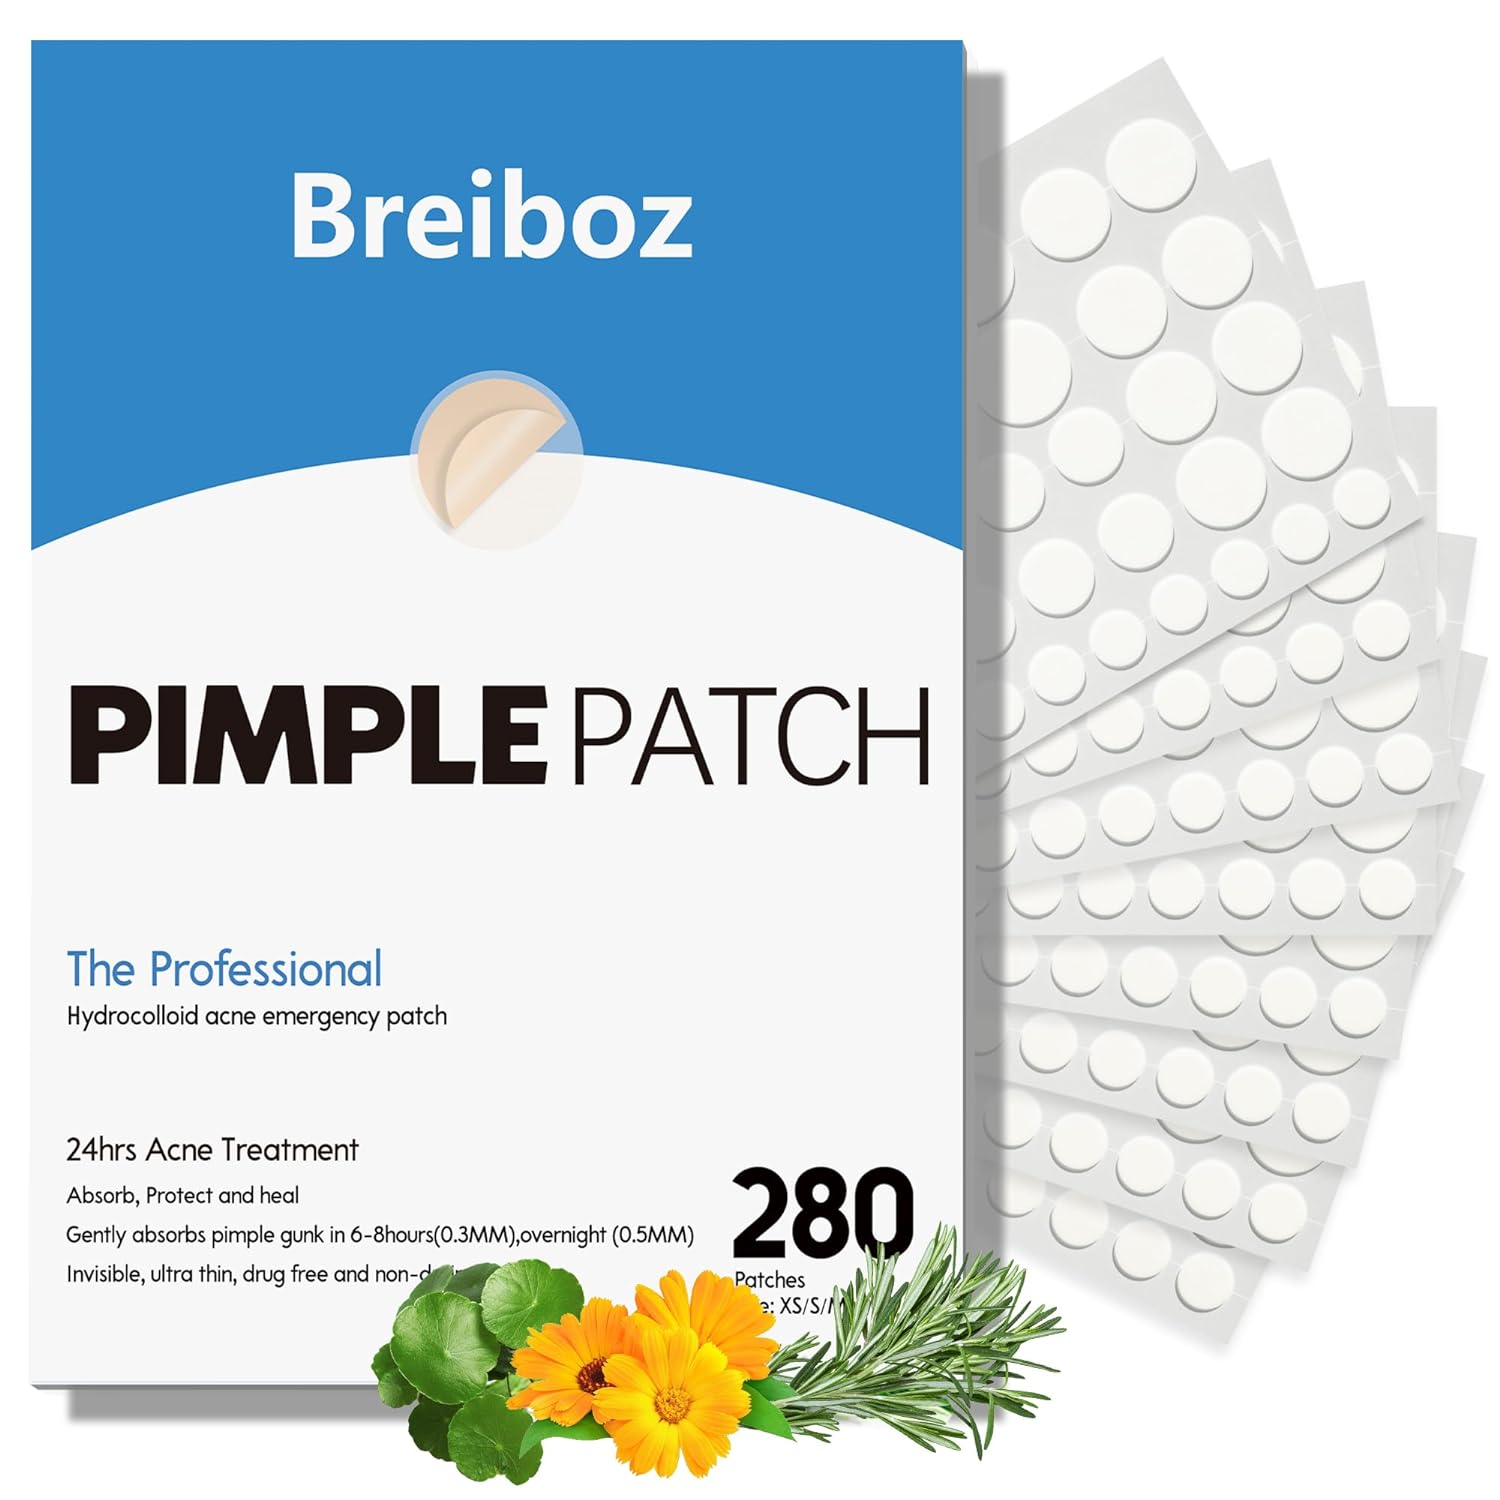 Day and Night Acne Pimple Patches for Face Invisible Spot Patches for Covering Zits and Blemishes with Tea Tree, Salicylic Acid & Cica Oil-280 Patches,5 Size,2 Thickness…